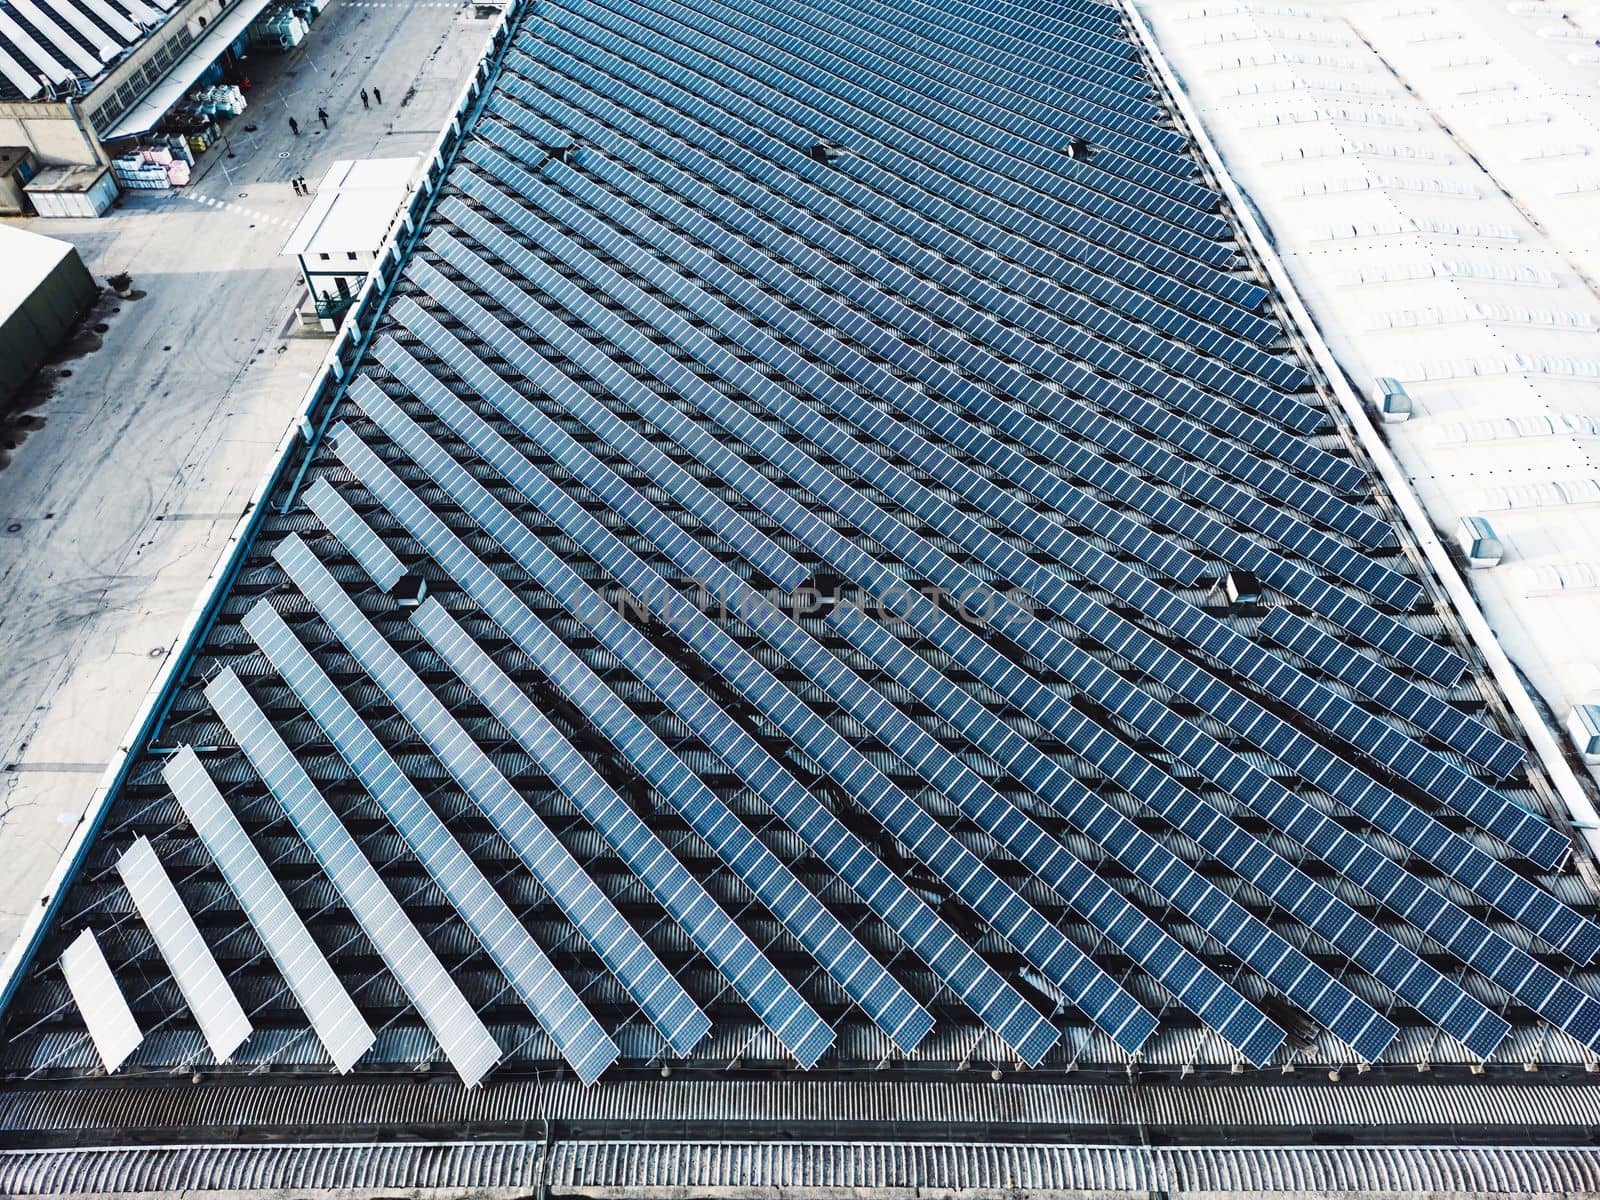 Aerial view of solar panels on industrial buildings. Drone point of view, flying over industrial area, with roof tops covered in solar panels.